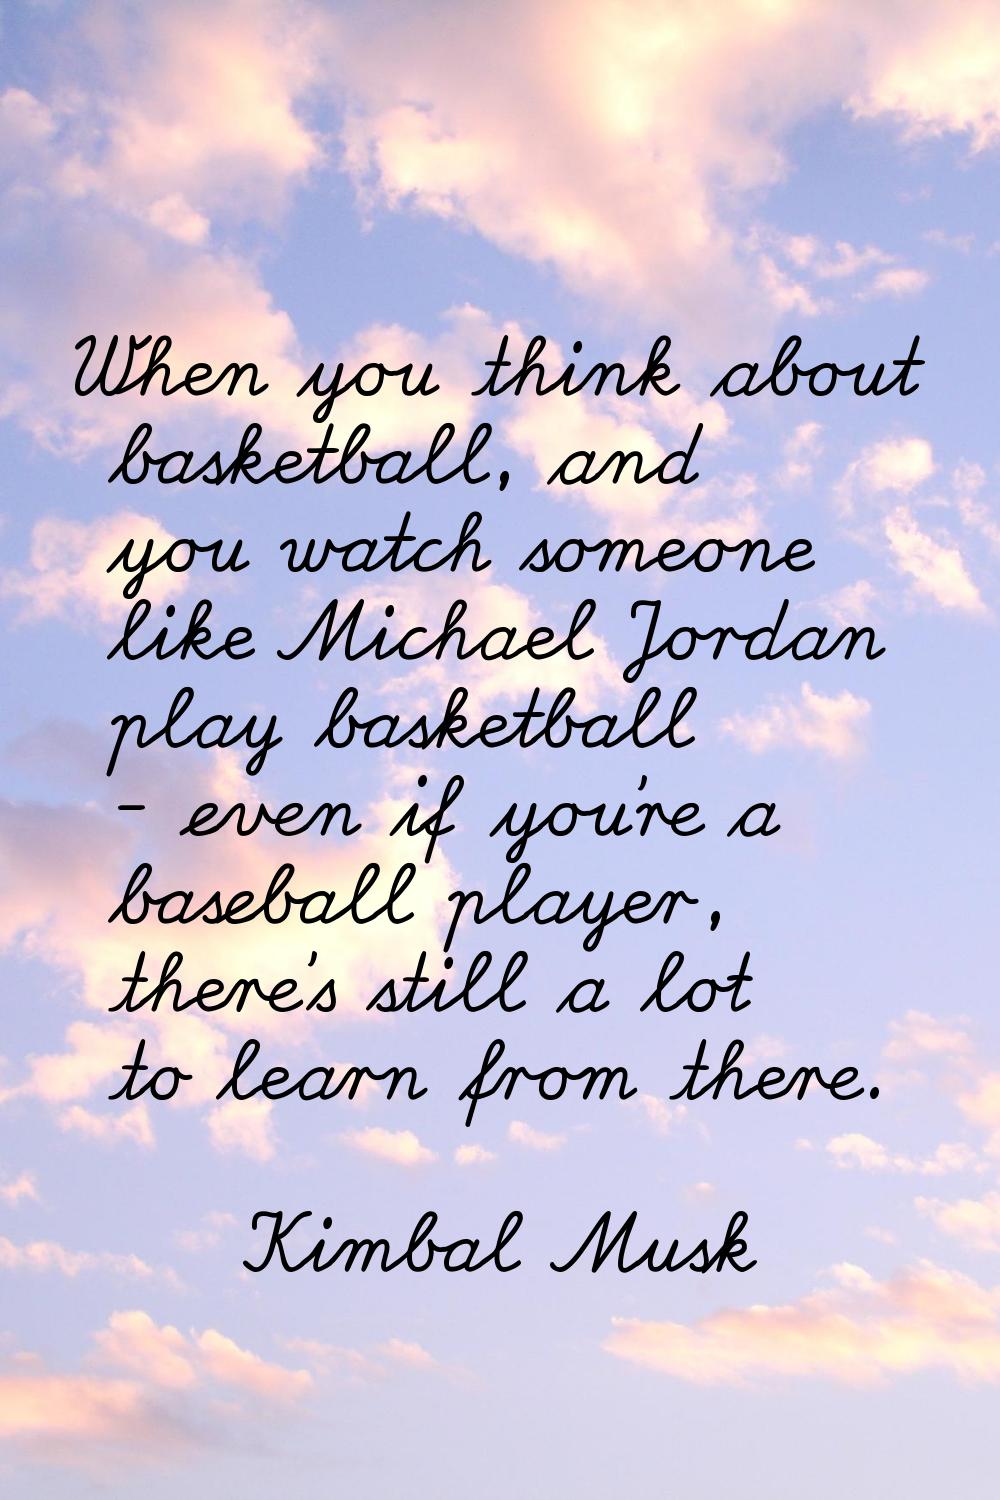 When you think about basketball, and you watch someone like Michael Jordan play basketball - even i